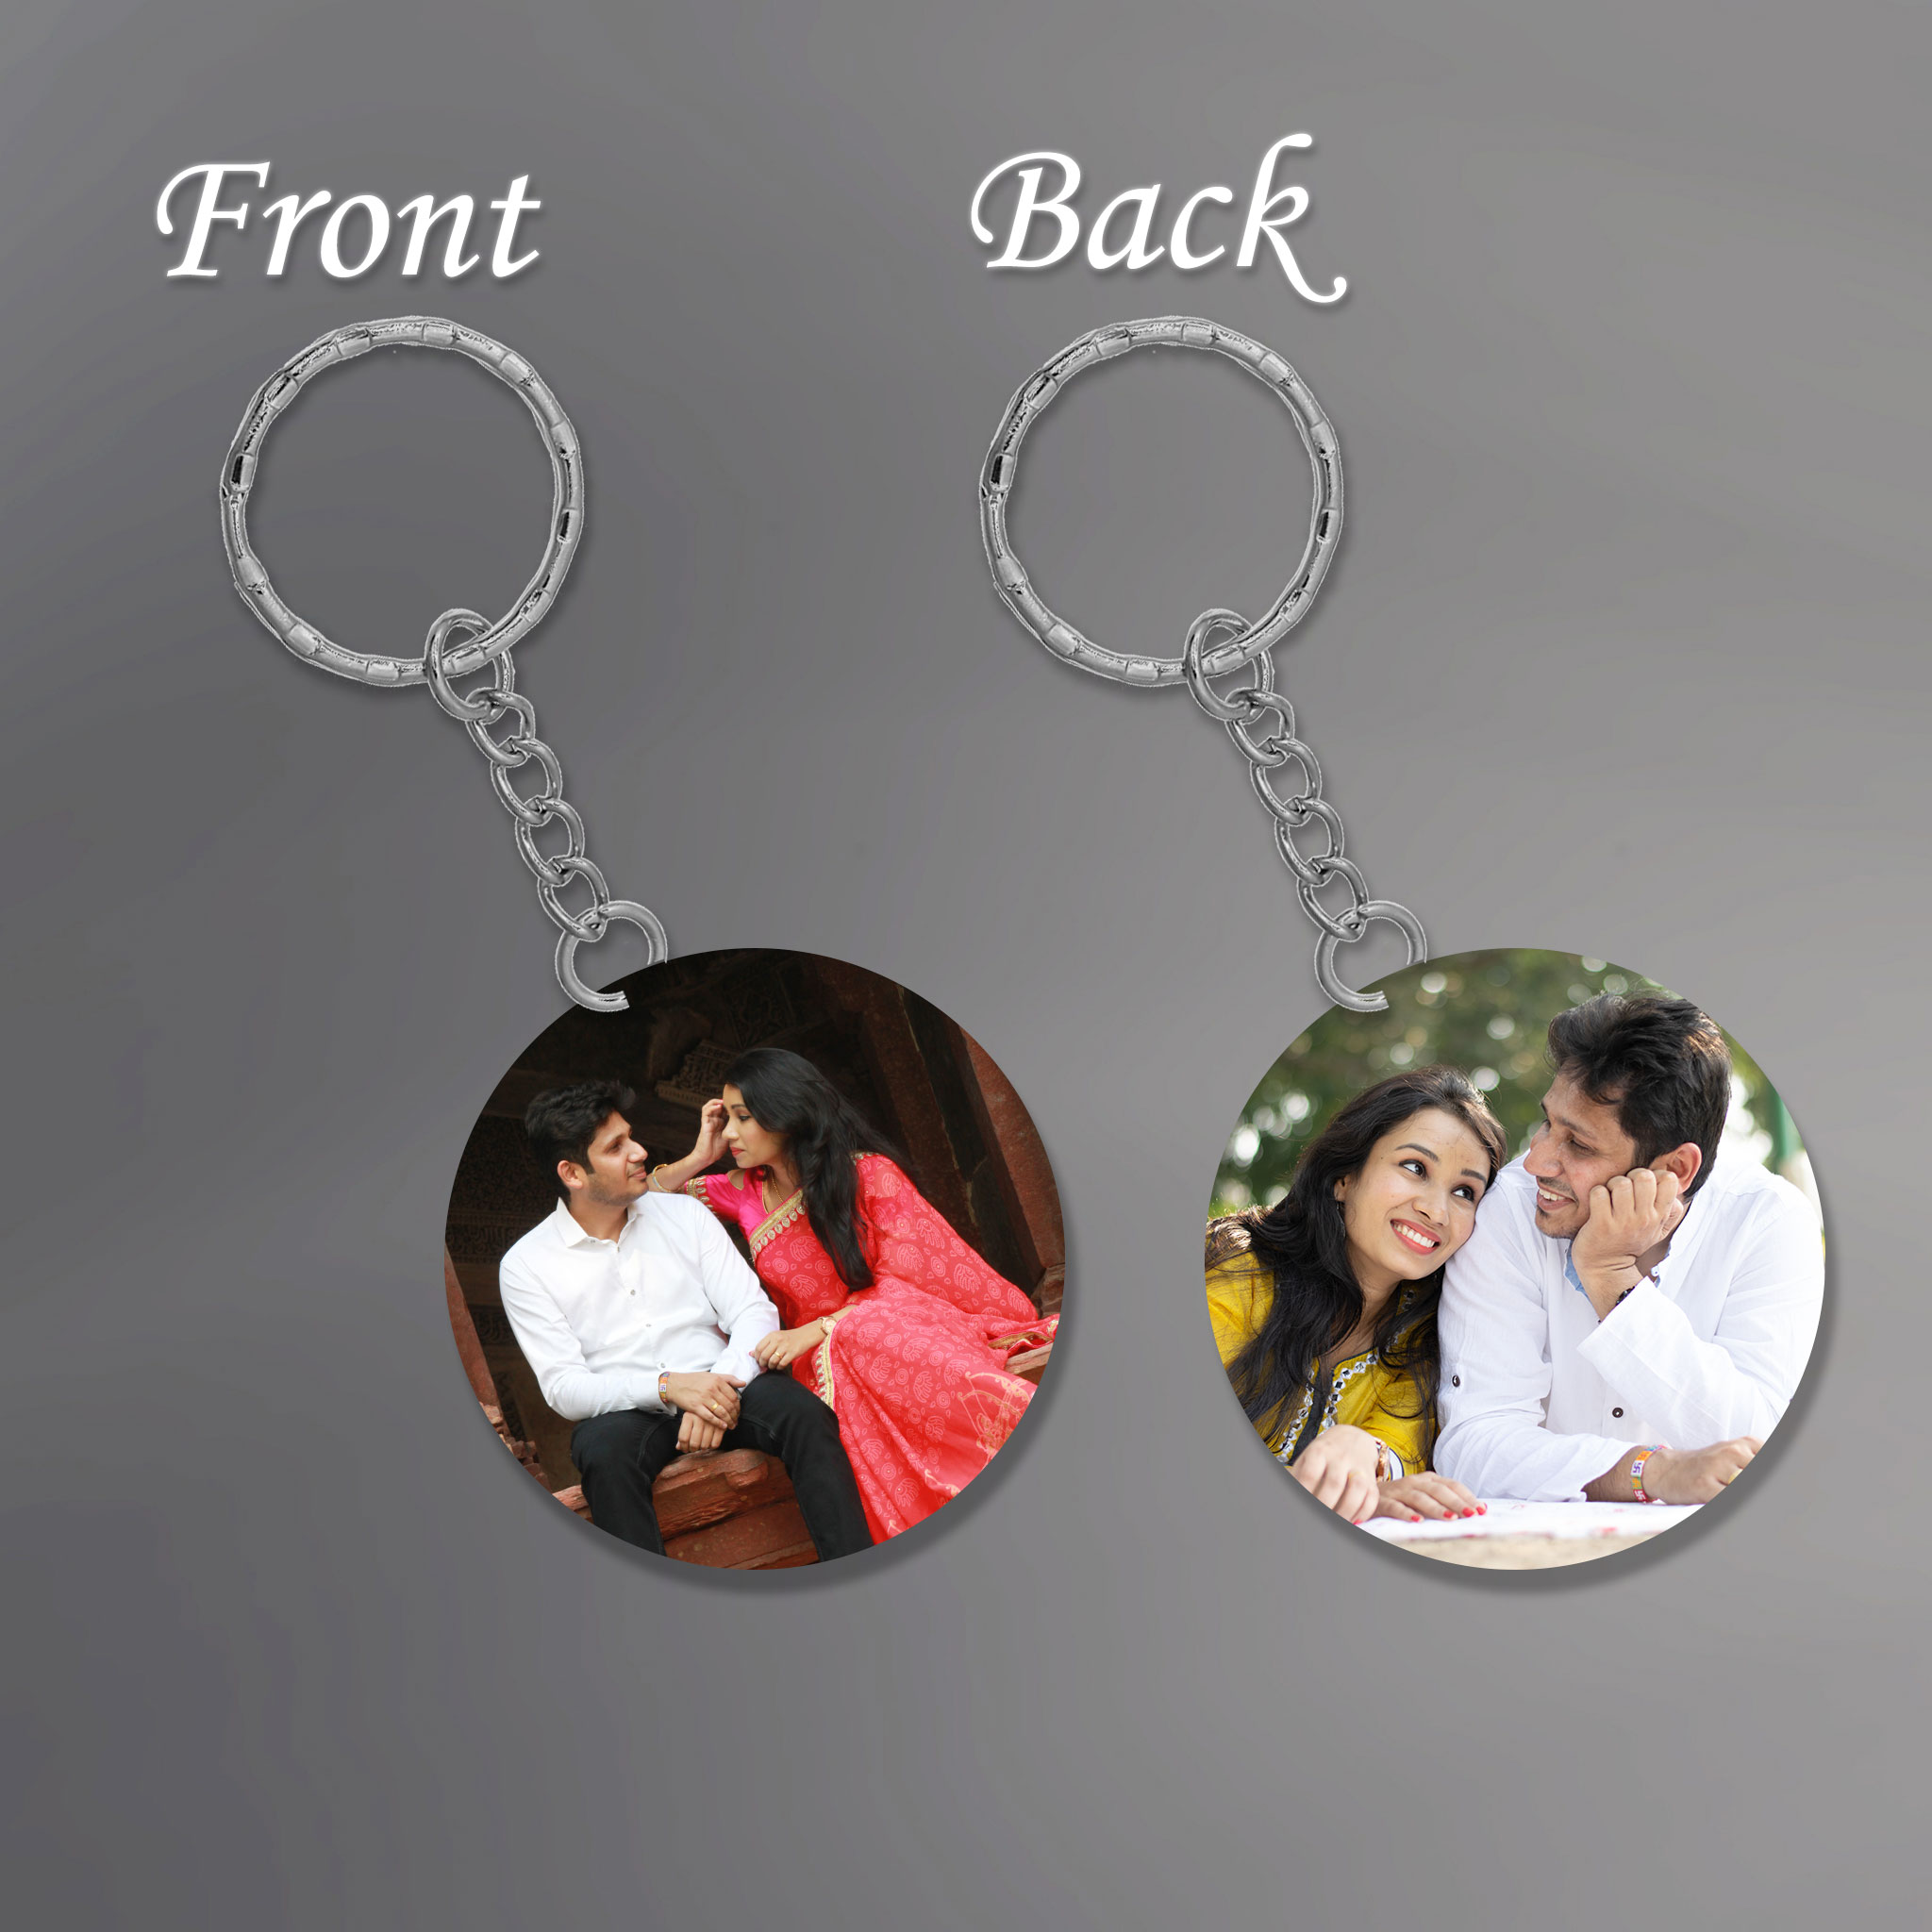 Print99 Photo Printed Personalized Heart Shape Double Sided Keychain/ Keyring  Key Chain Price in India - Buy Print99 Photo Printed Personalized Heart  Shape Double Sided Keychain/ Keyring Key Chain online at Flipkart.com